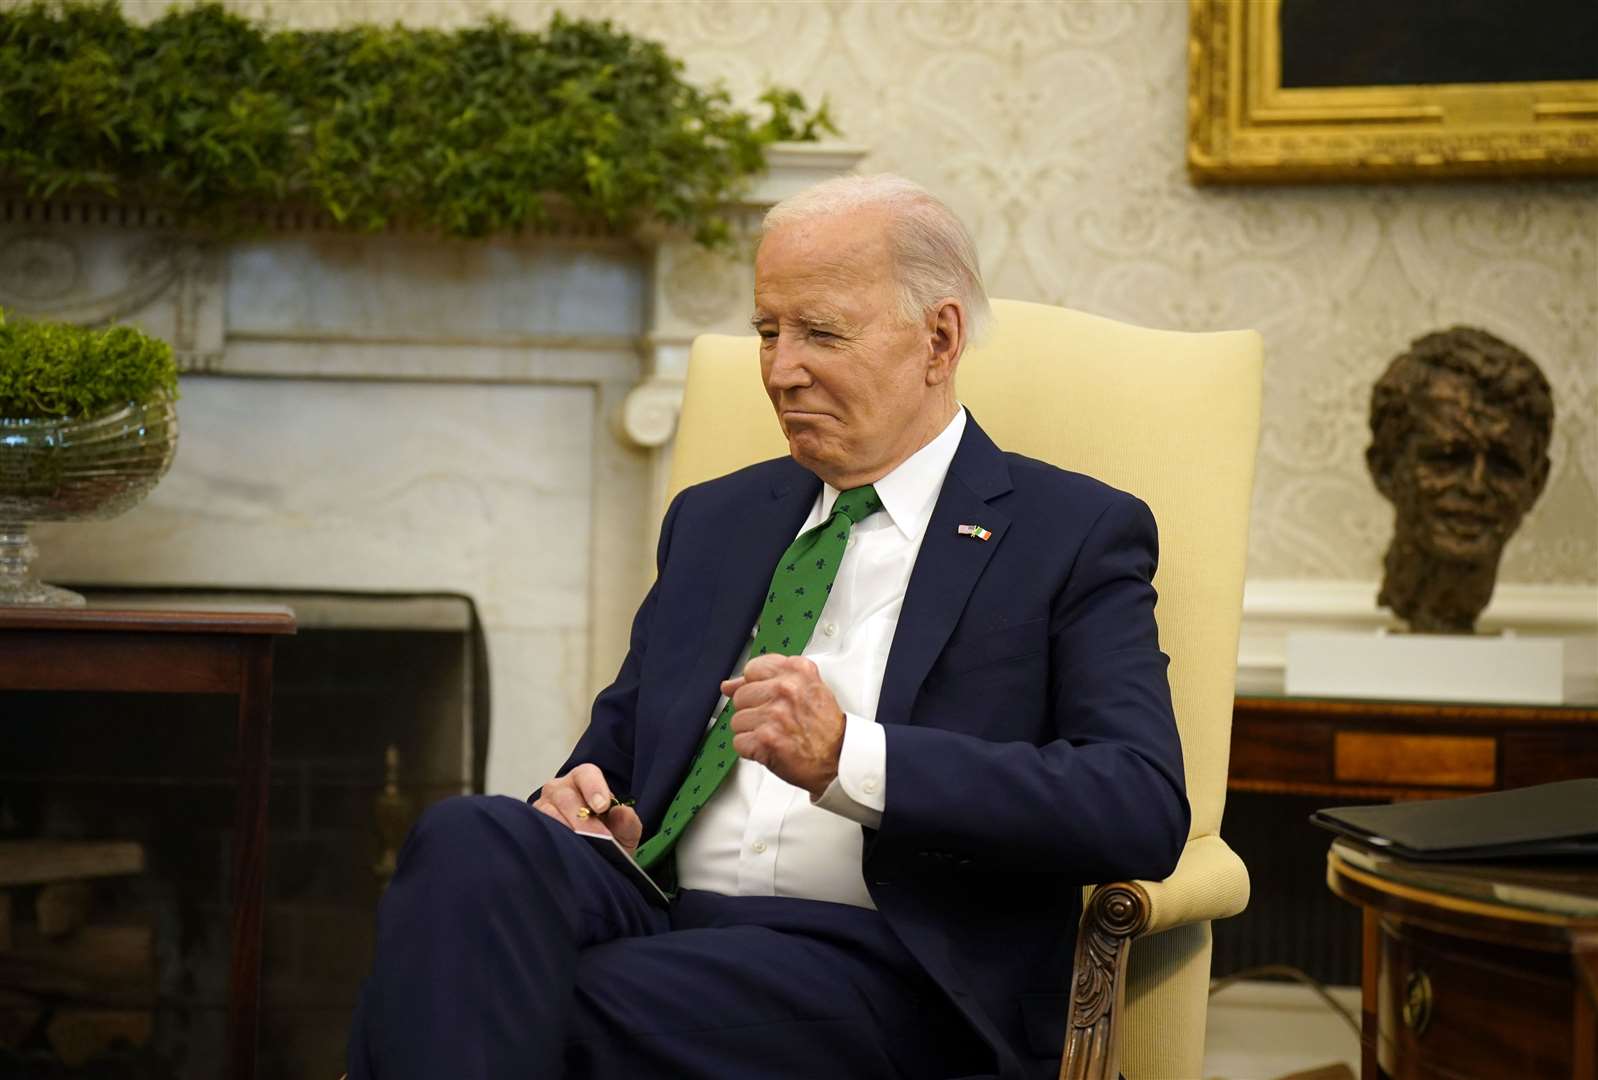 President Joe Biden at a bilateral meeting with Taoiseach Leo Varadkar in the Oval Office at the White House (Niall Carson/PA)